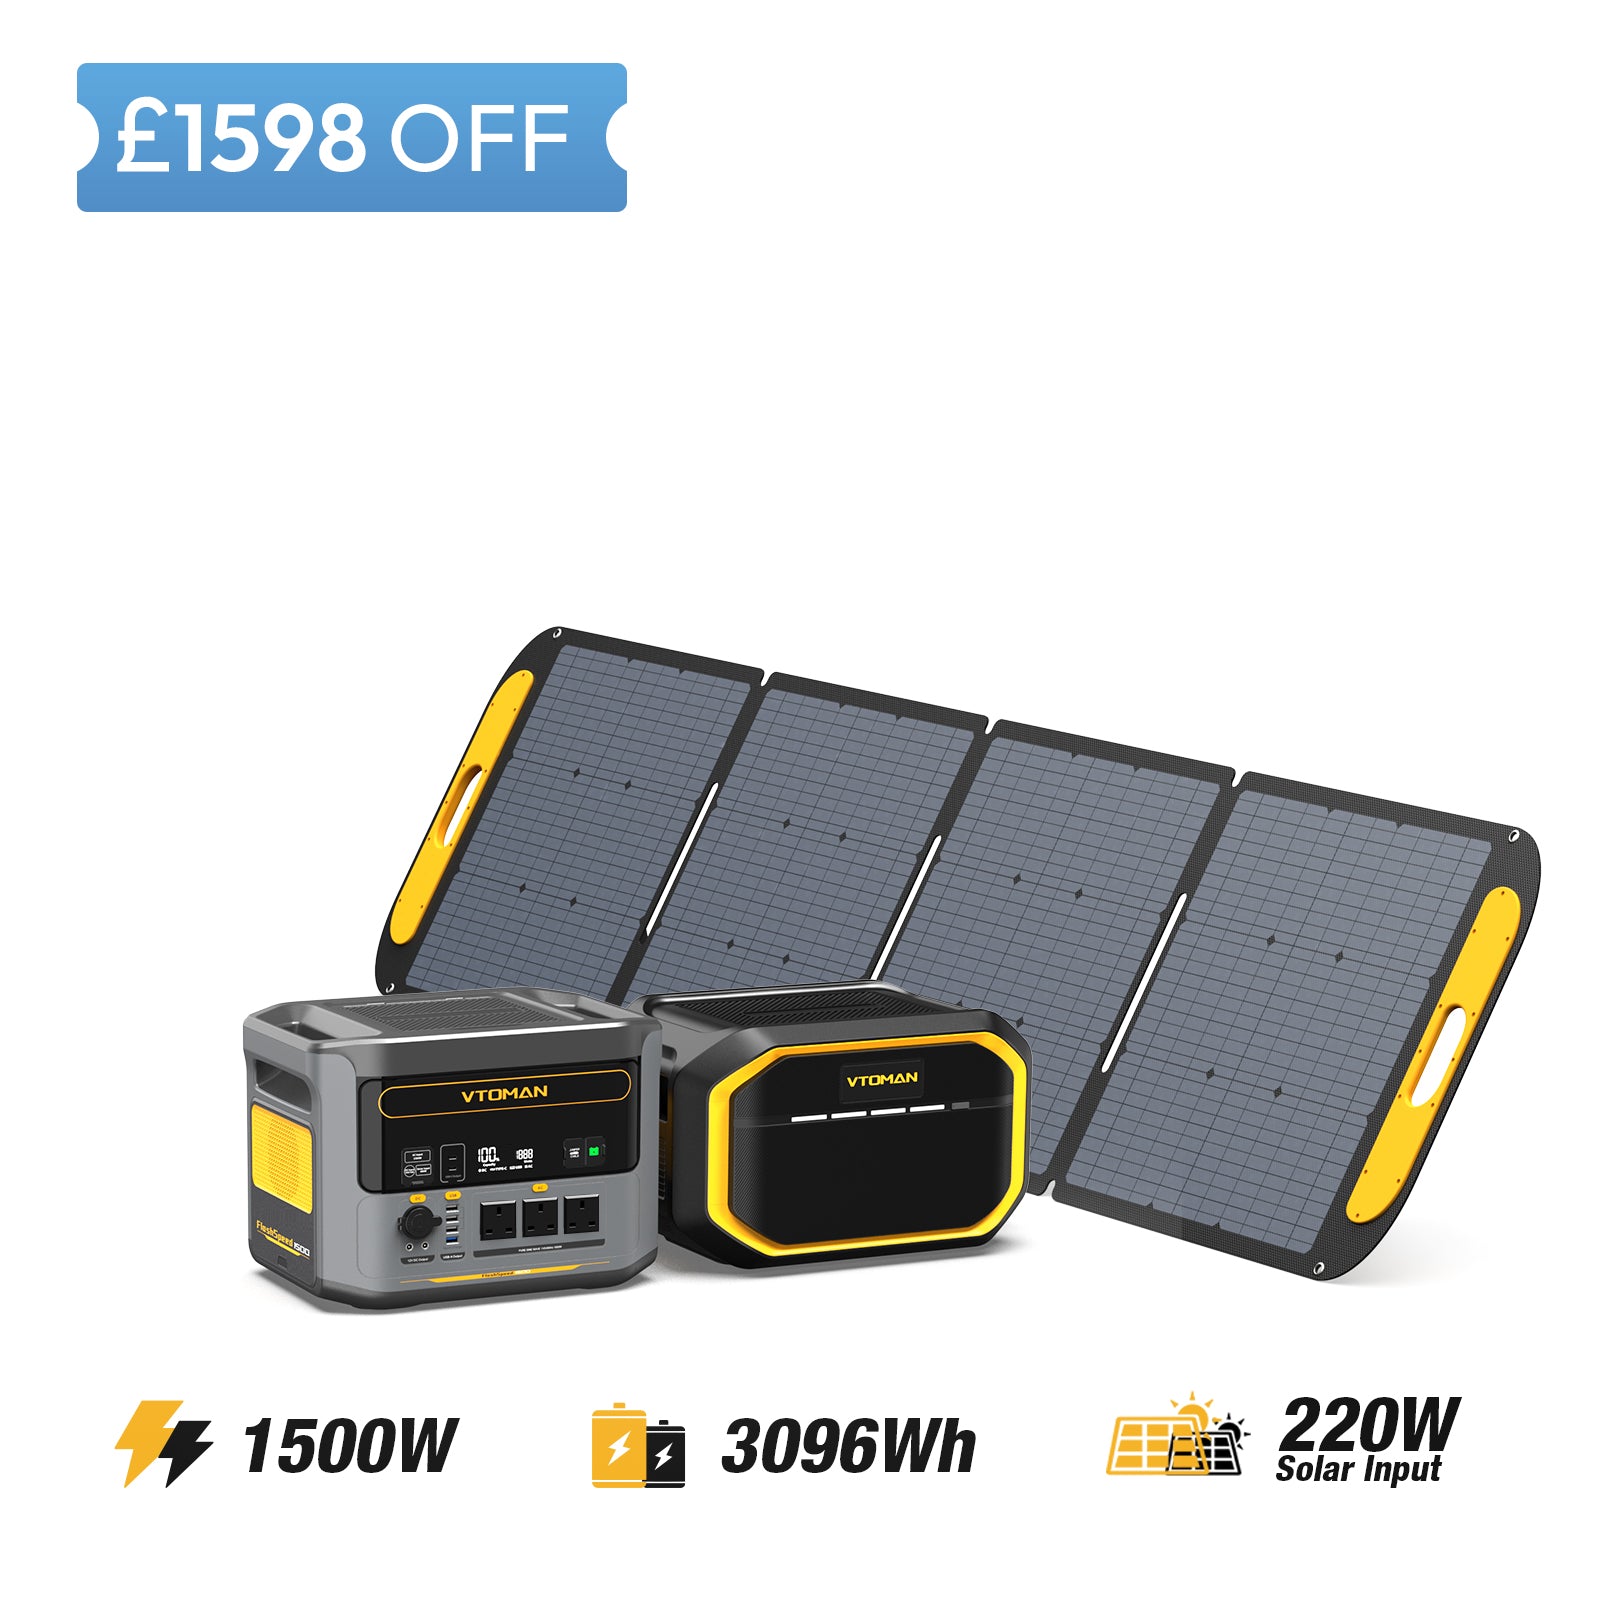 FlashSpeed 1500 and 1548Wh extra battery and 220W solar panel save £1598in summer sale